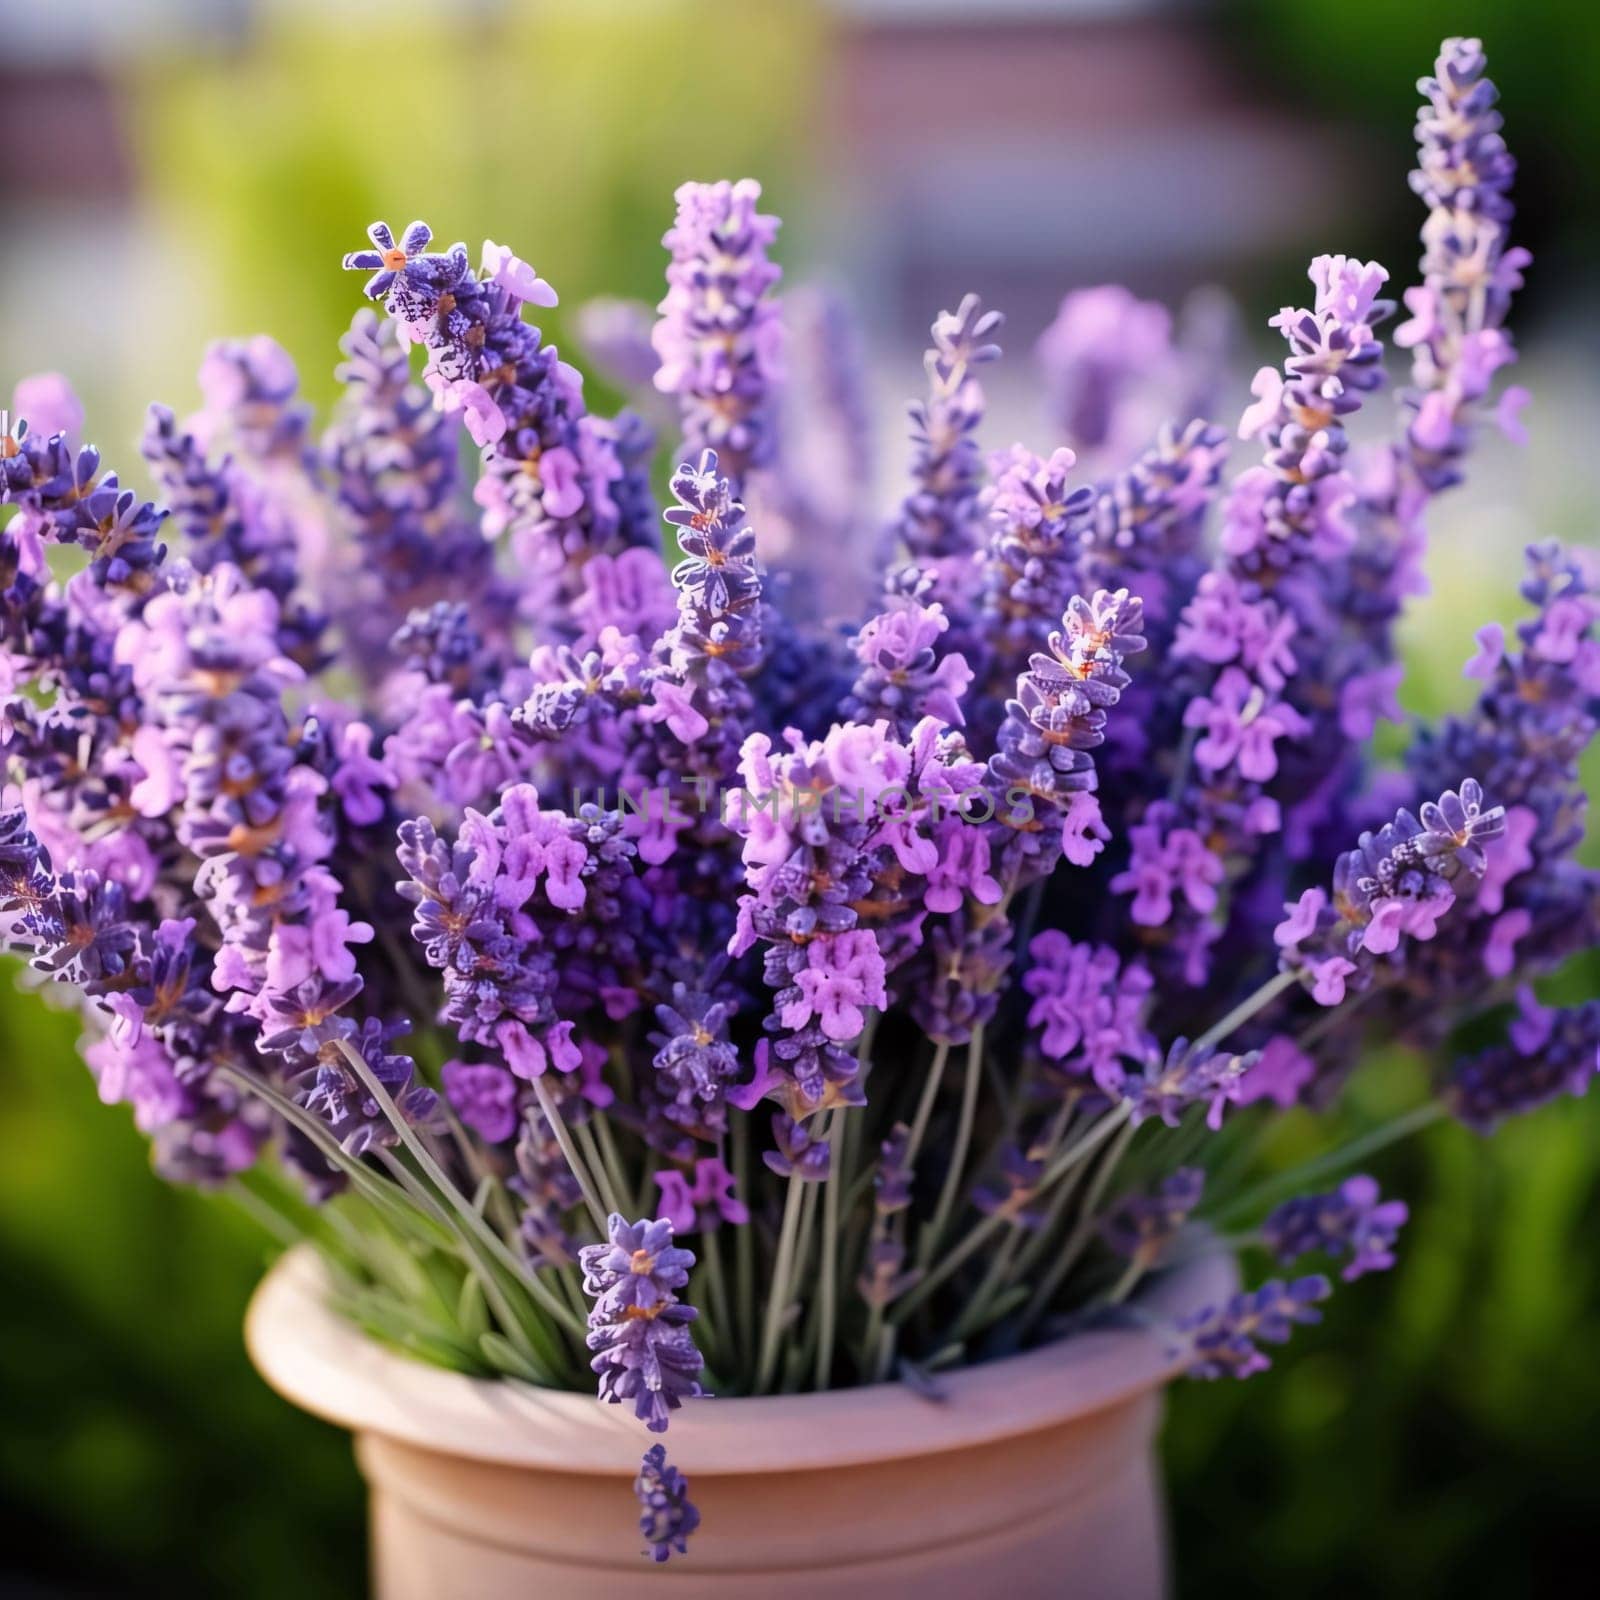 Lavender flowers close up photo.Flowering flowers, a symbol of spring, new life. by ThemesS